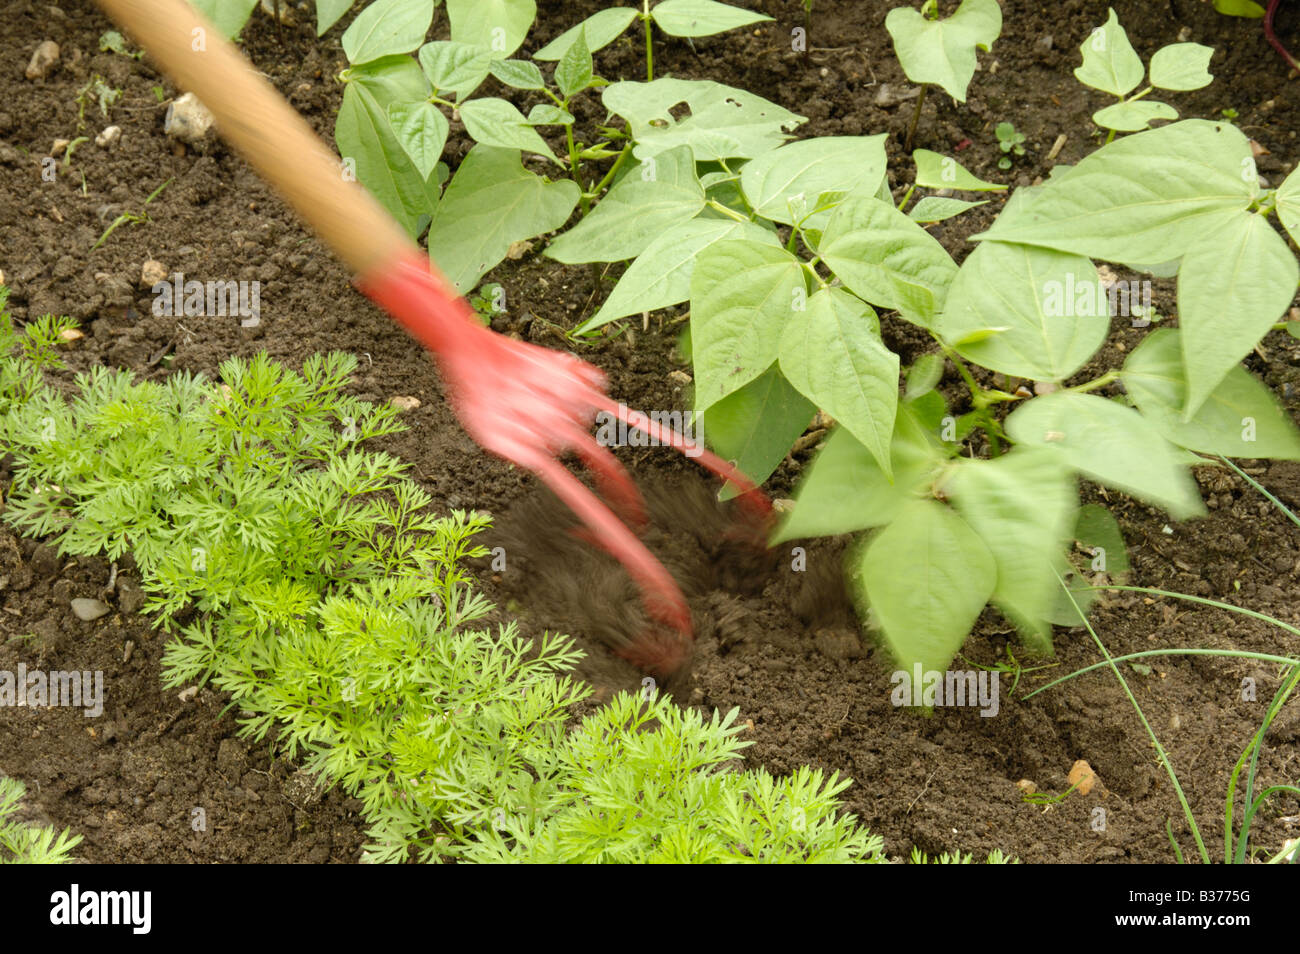 Using A Hand Cultivator To Till Soil Between Carrots Nanco French